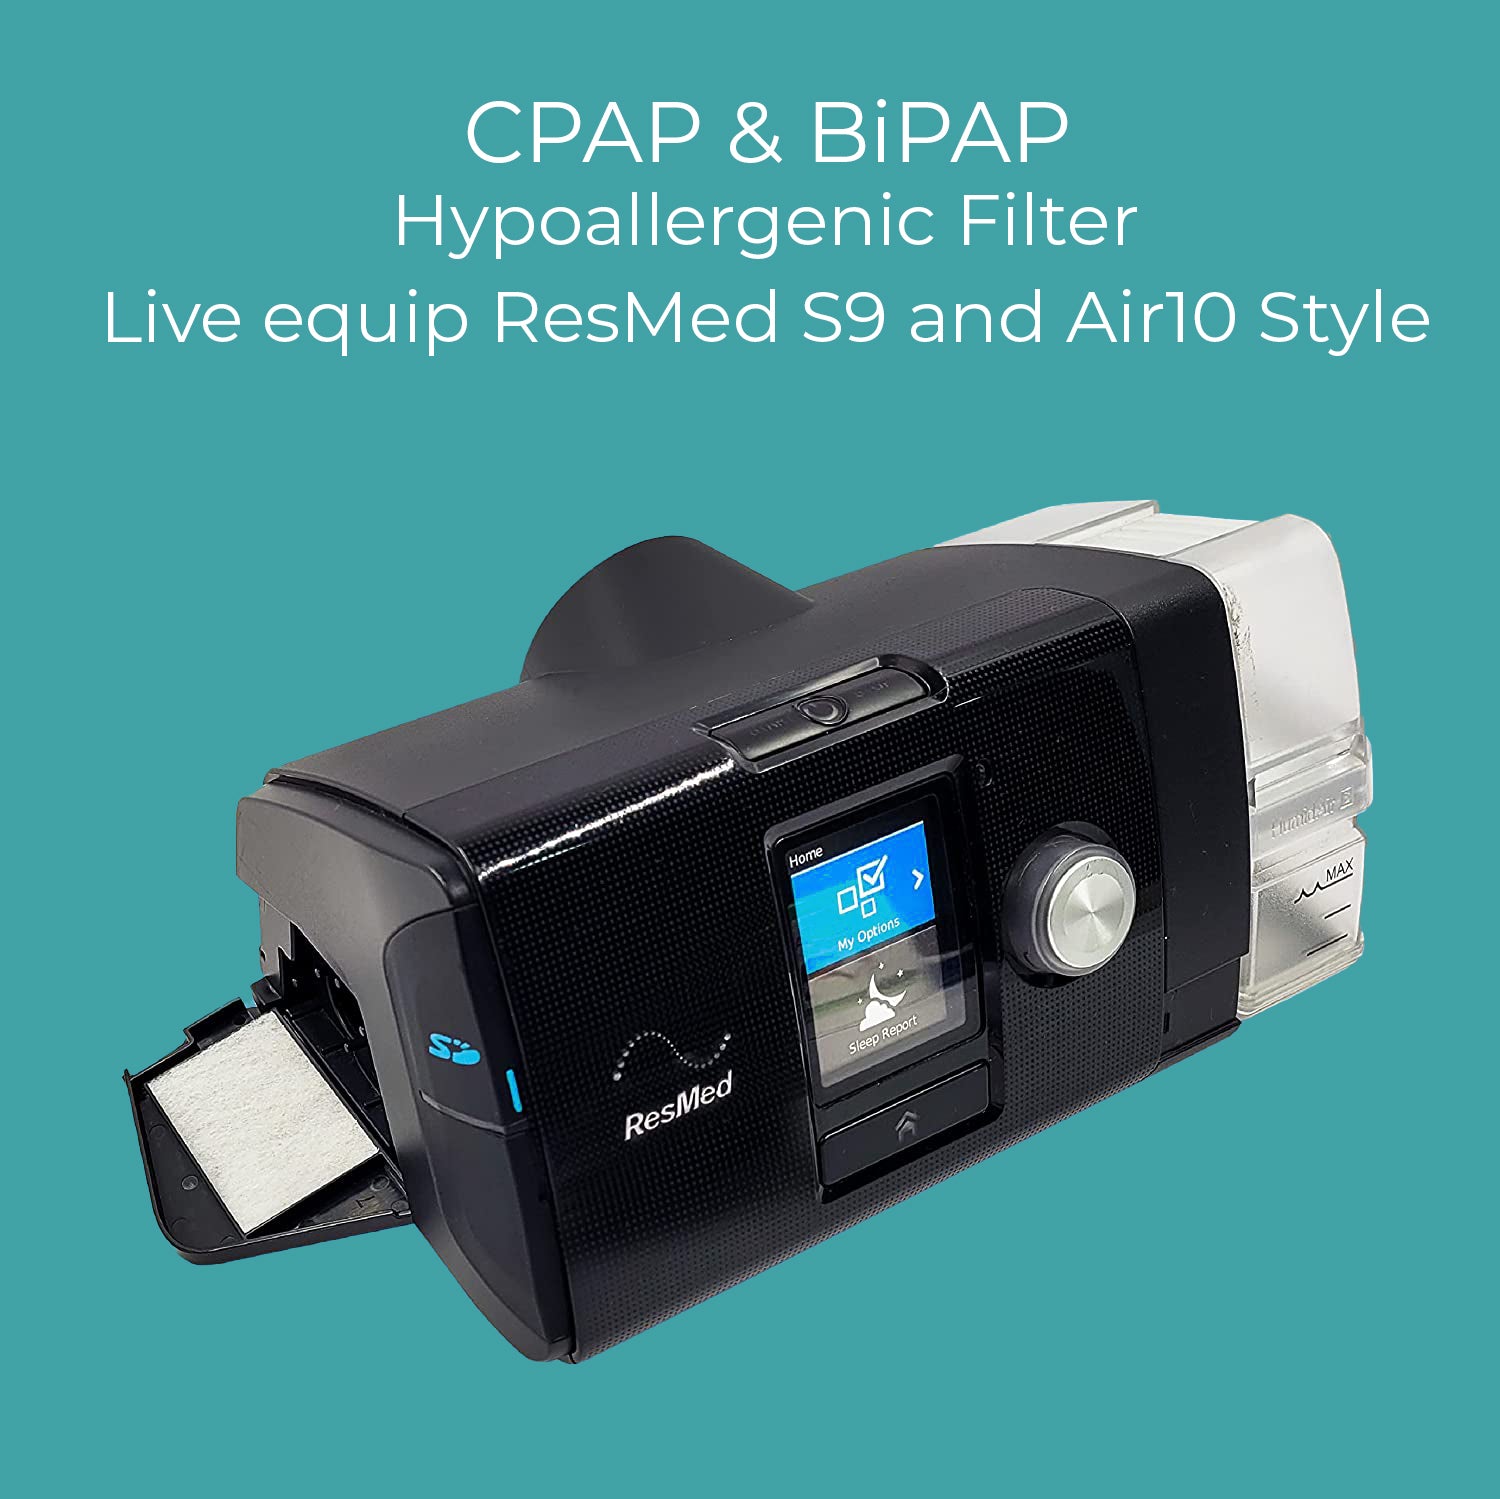 CPAP & BiPAP Hypoallergenic Filter for Resmed S9 and Air 10 Style CPAP/BiPAP Machine